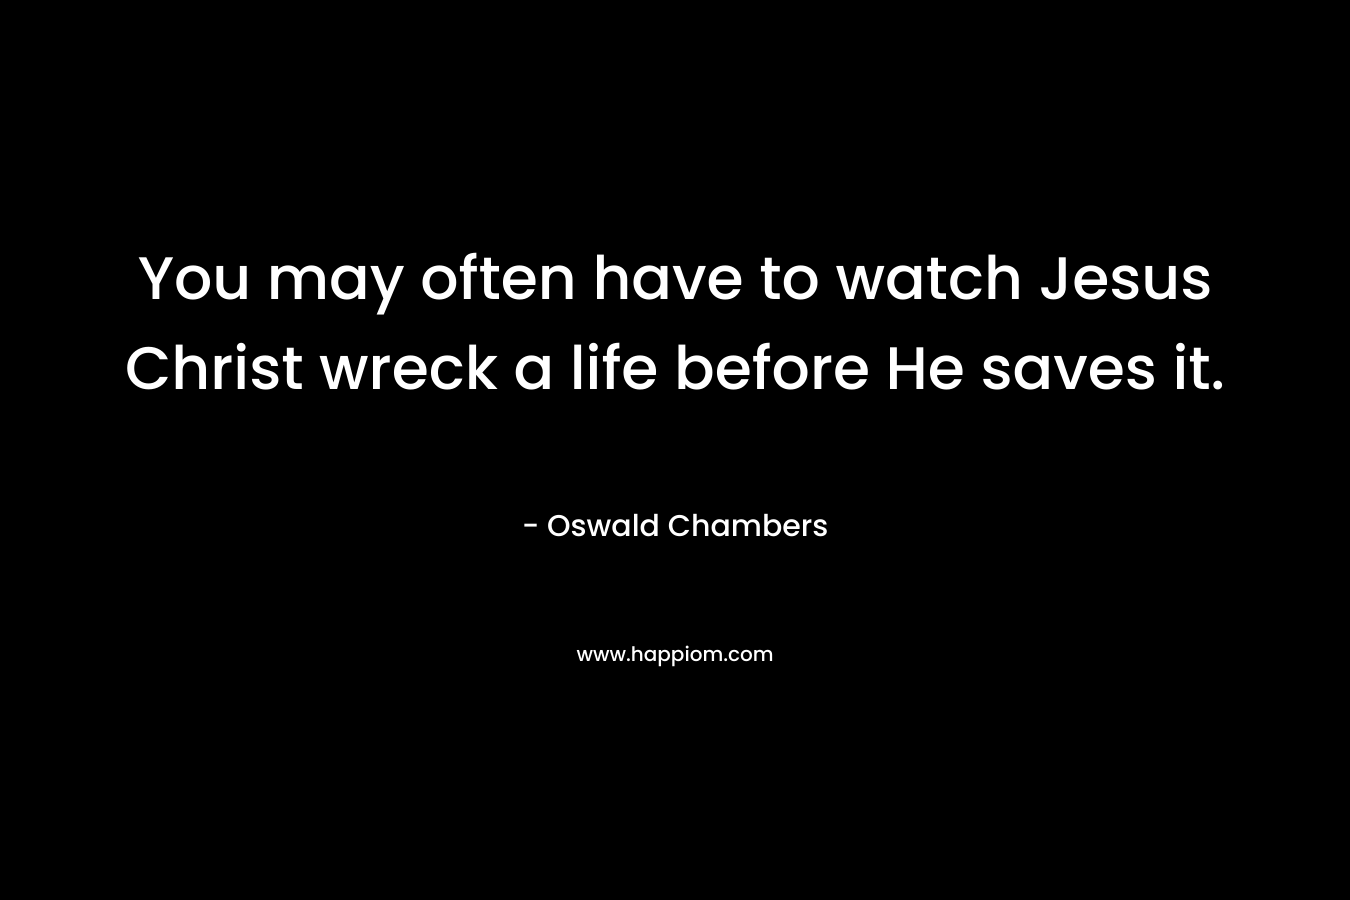 You may often have to watch Jesus Christ wreck a life before He saves it.